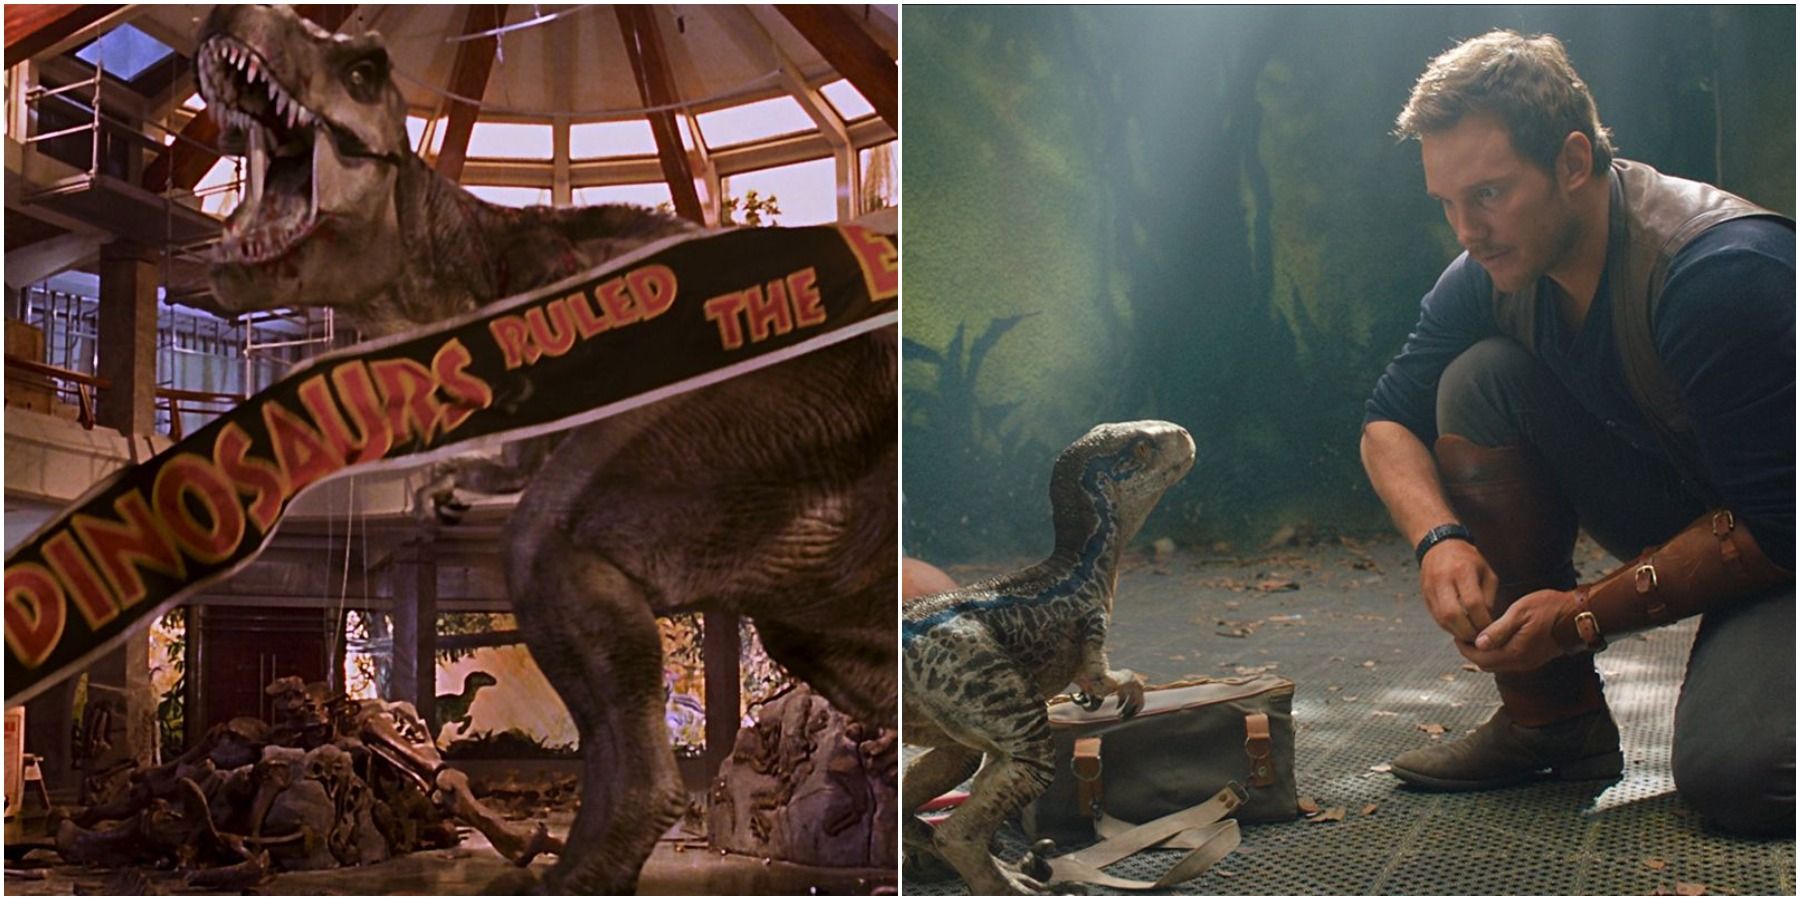 Jurassic Park Vs. Jurassic World: Which Is The Best Trilogy?